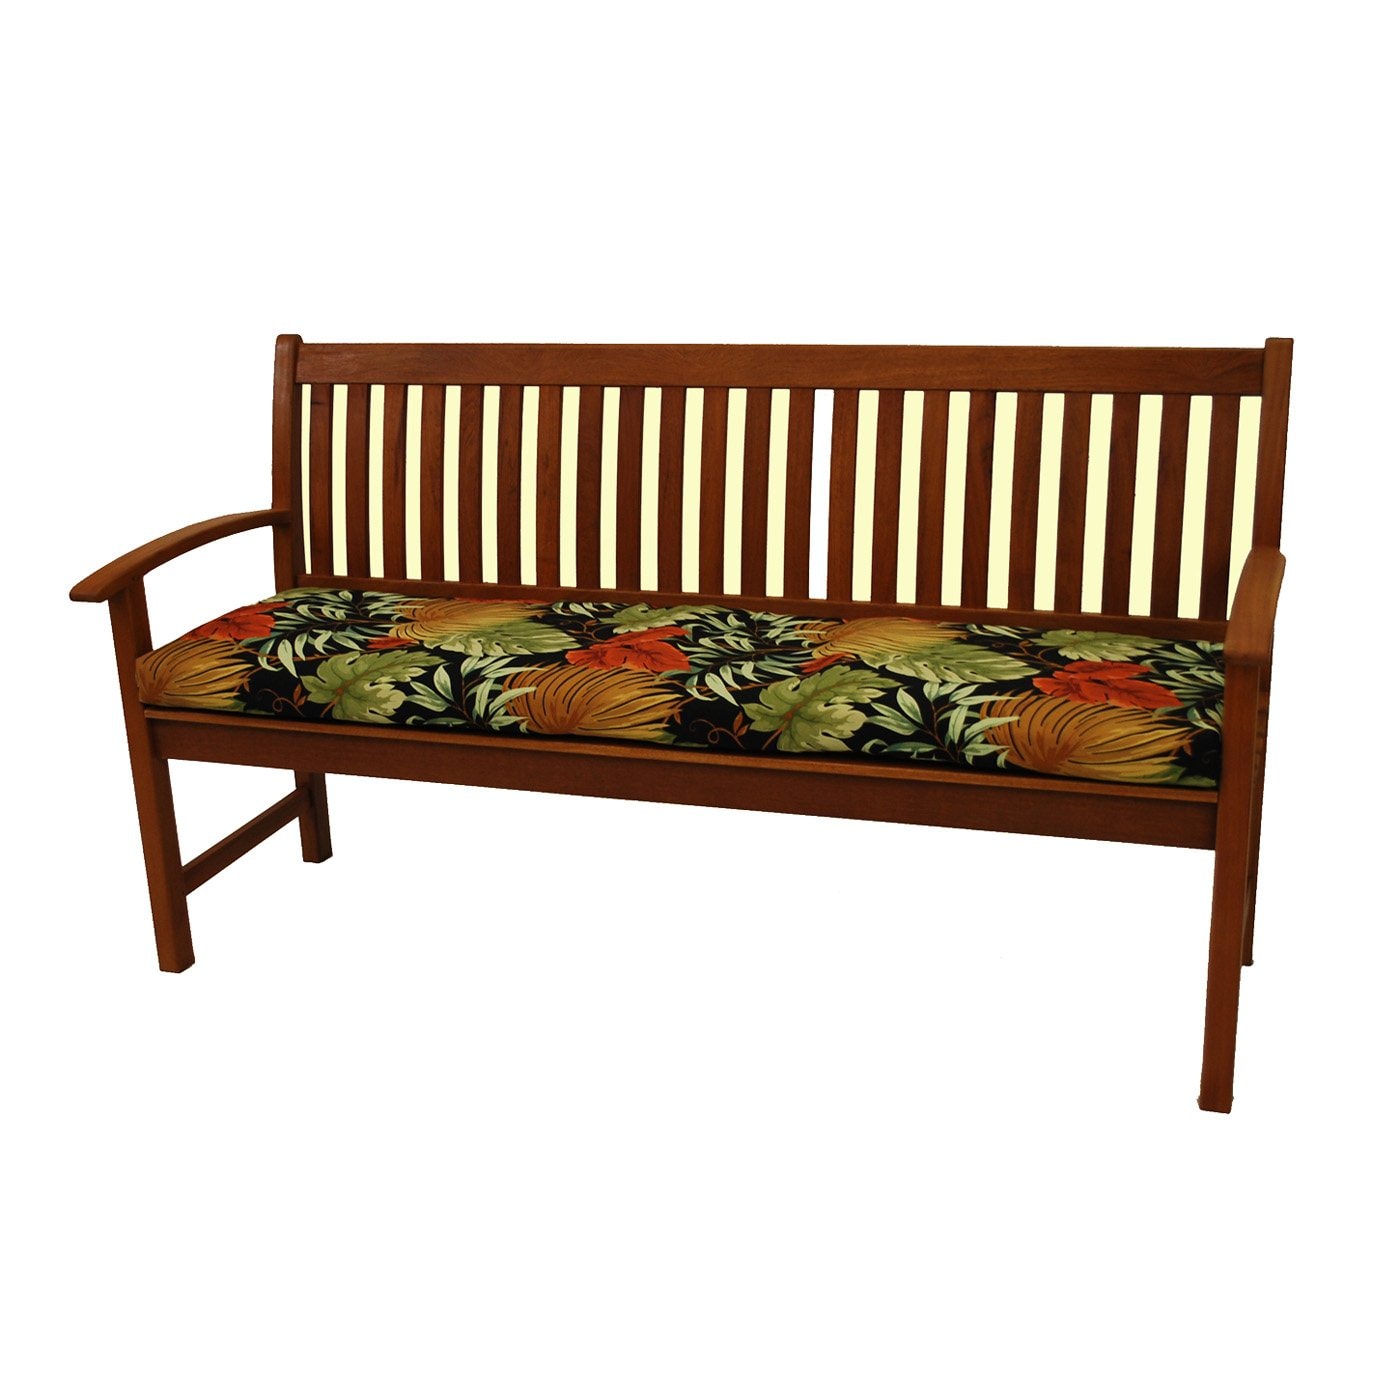 Blazing Needles 60-inch All-weather Outdoor Bench Cushion - On